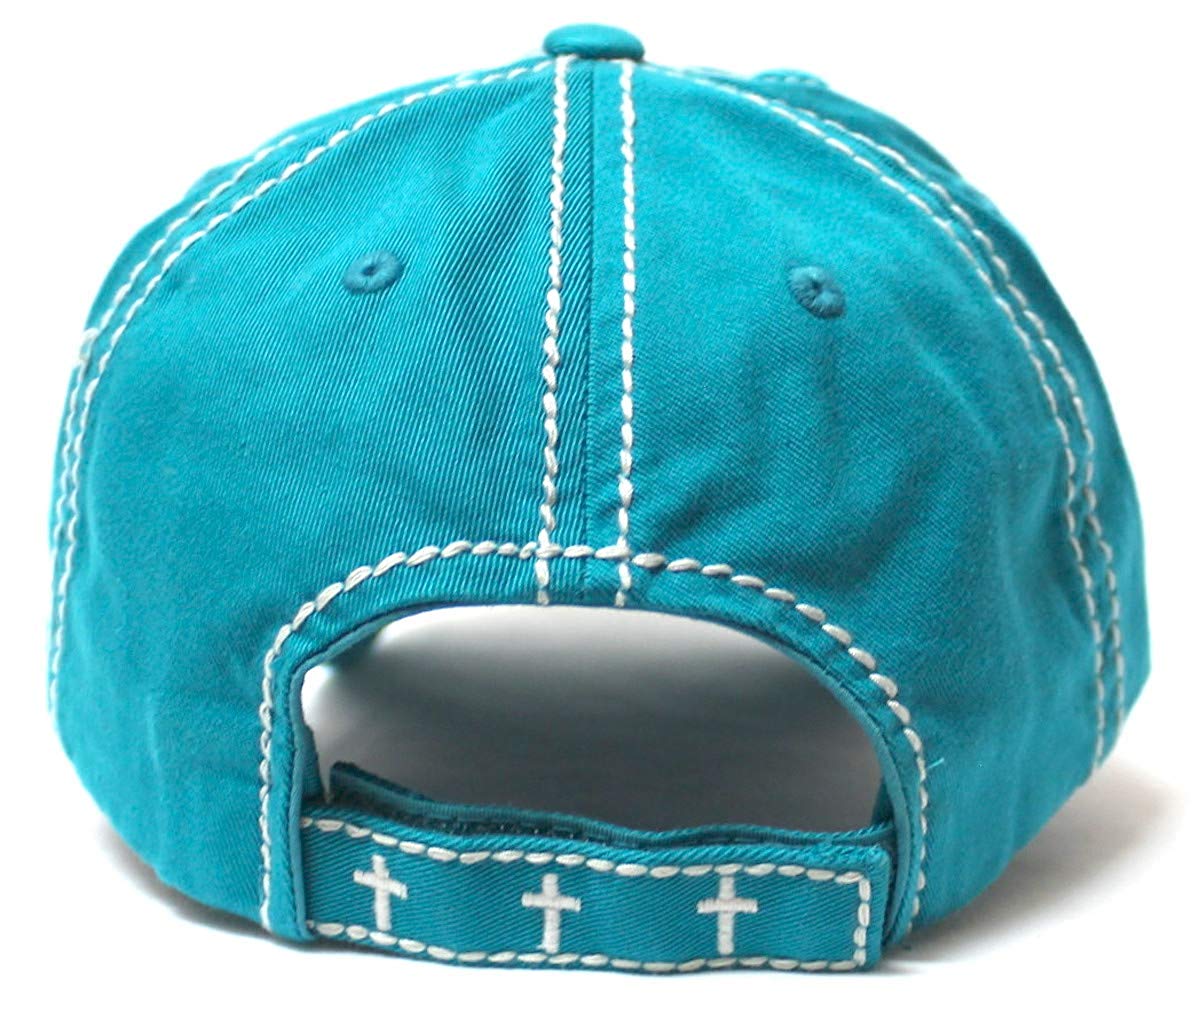 Women's Baseball Cap Jesus Loves This Hot Mess Heart Patch Embroidery Hat, Turquoise Jewel - Caps 'N Vintage 